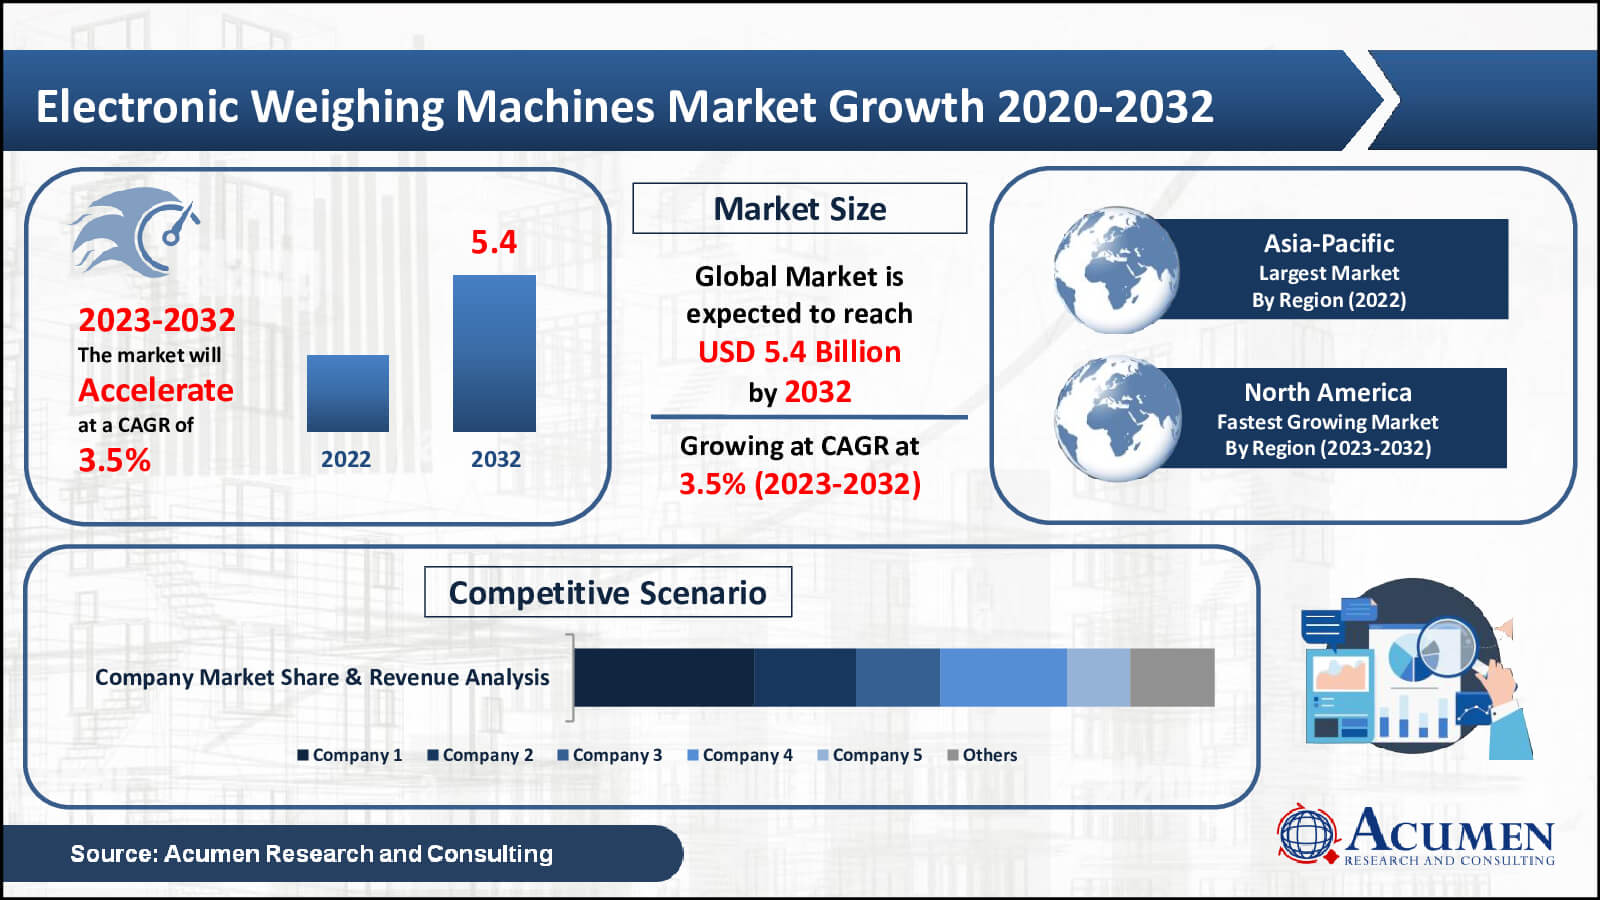 Electronic Weighing Machines Market Value